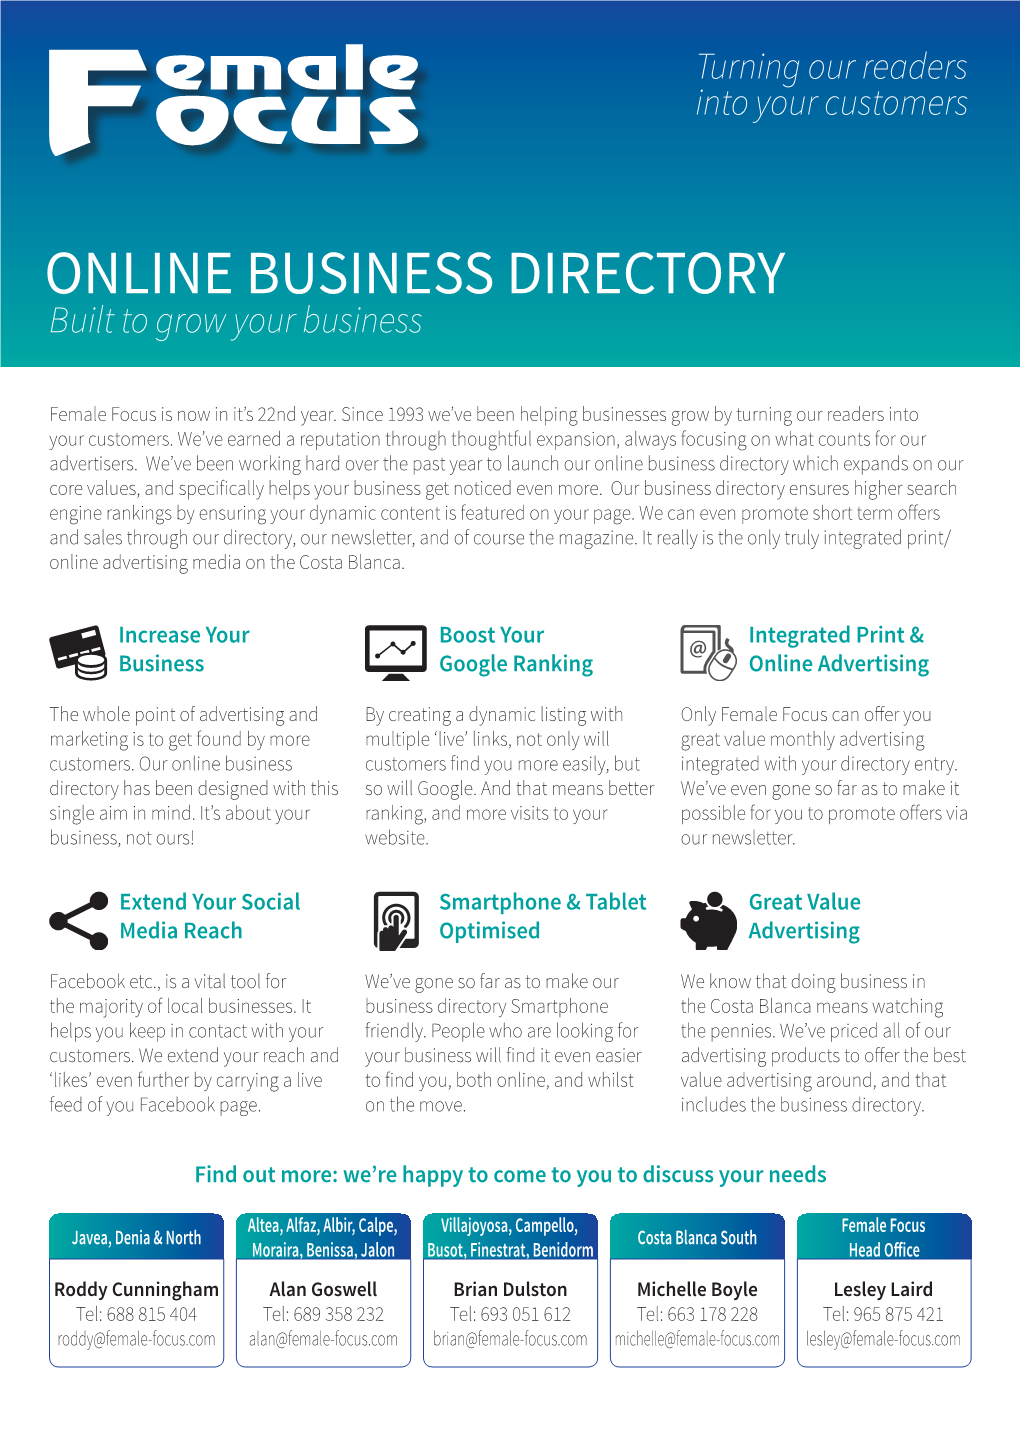 ONLINE BUSINESS DIRECTORY Built to Grow Your Business